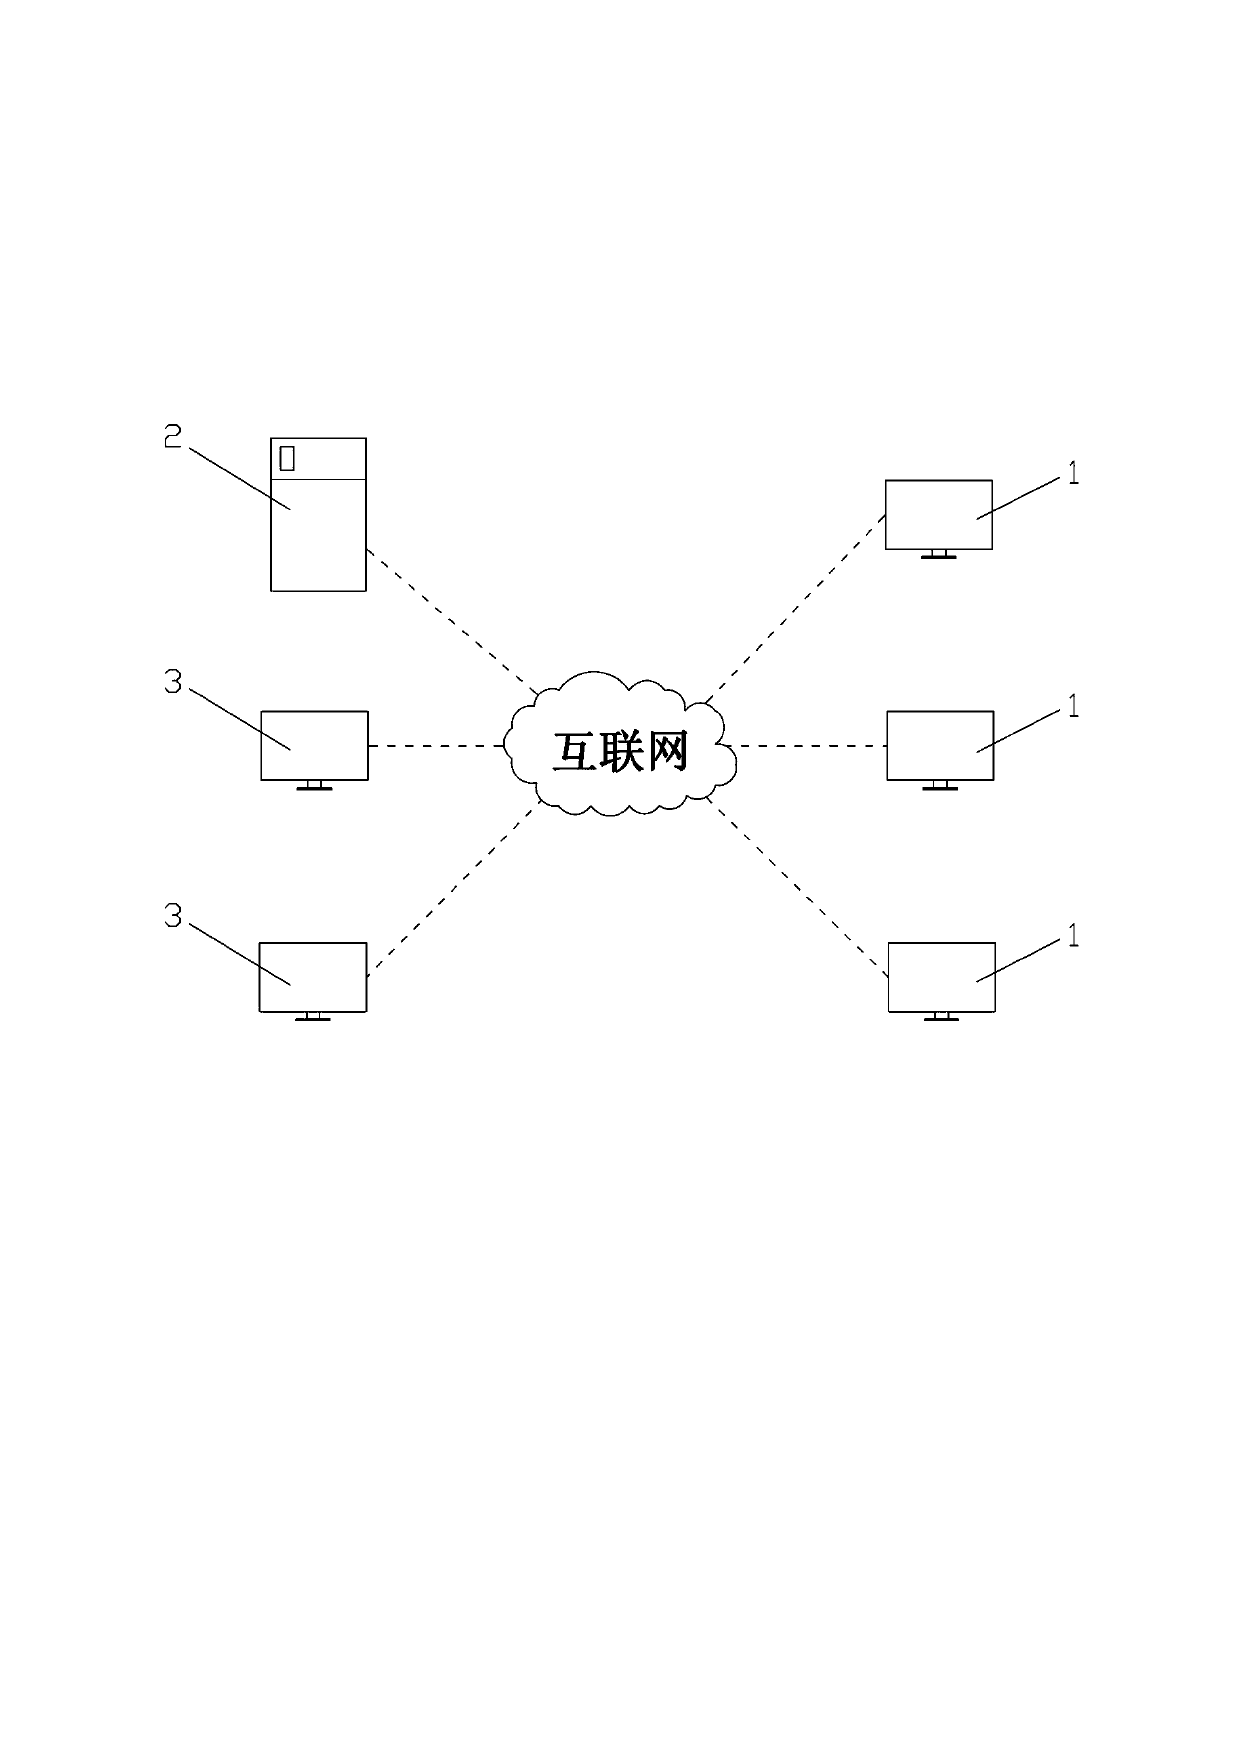 Method and system for storage of industrial cluster